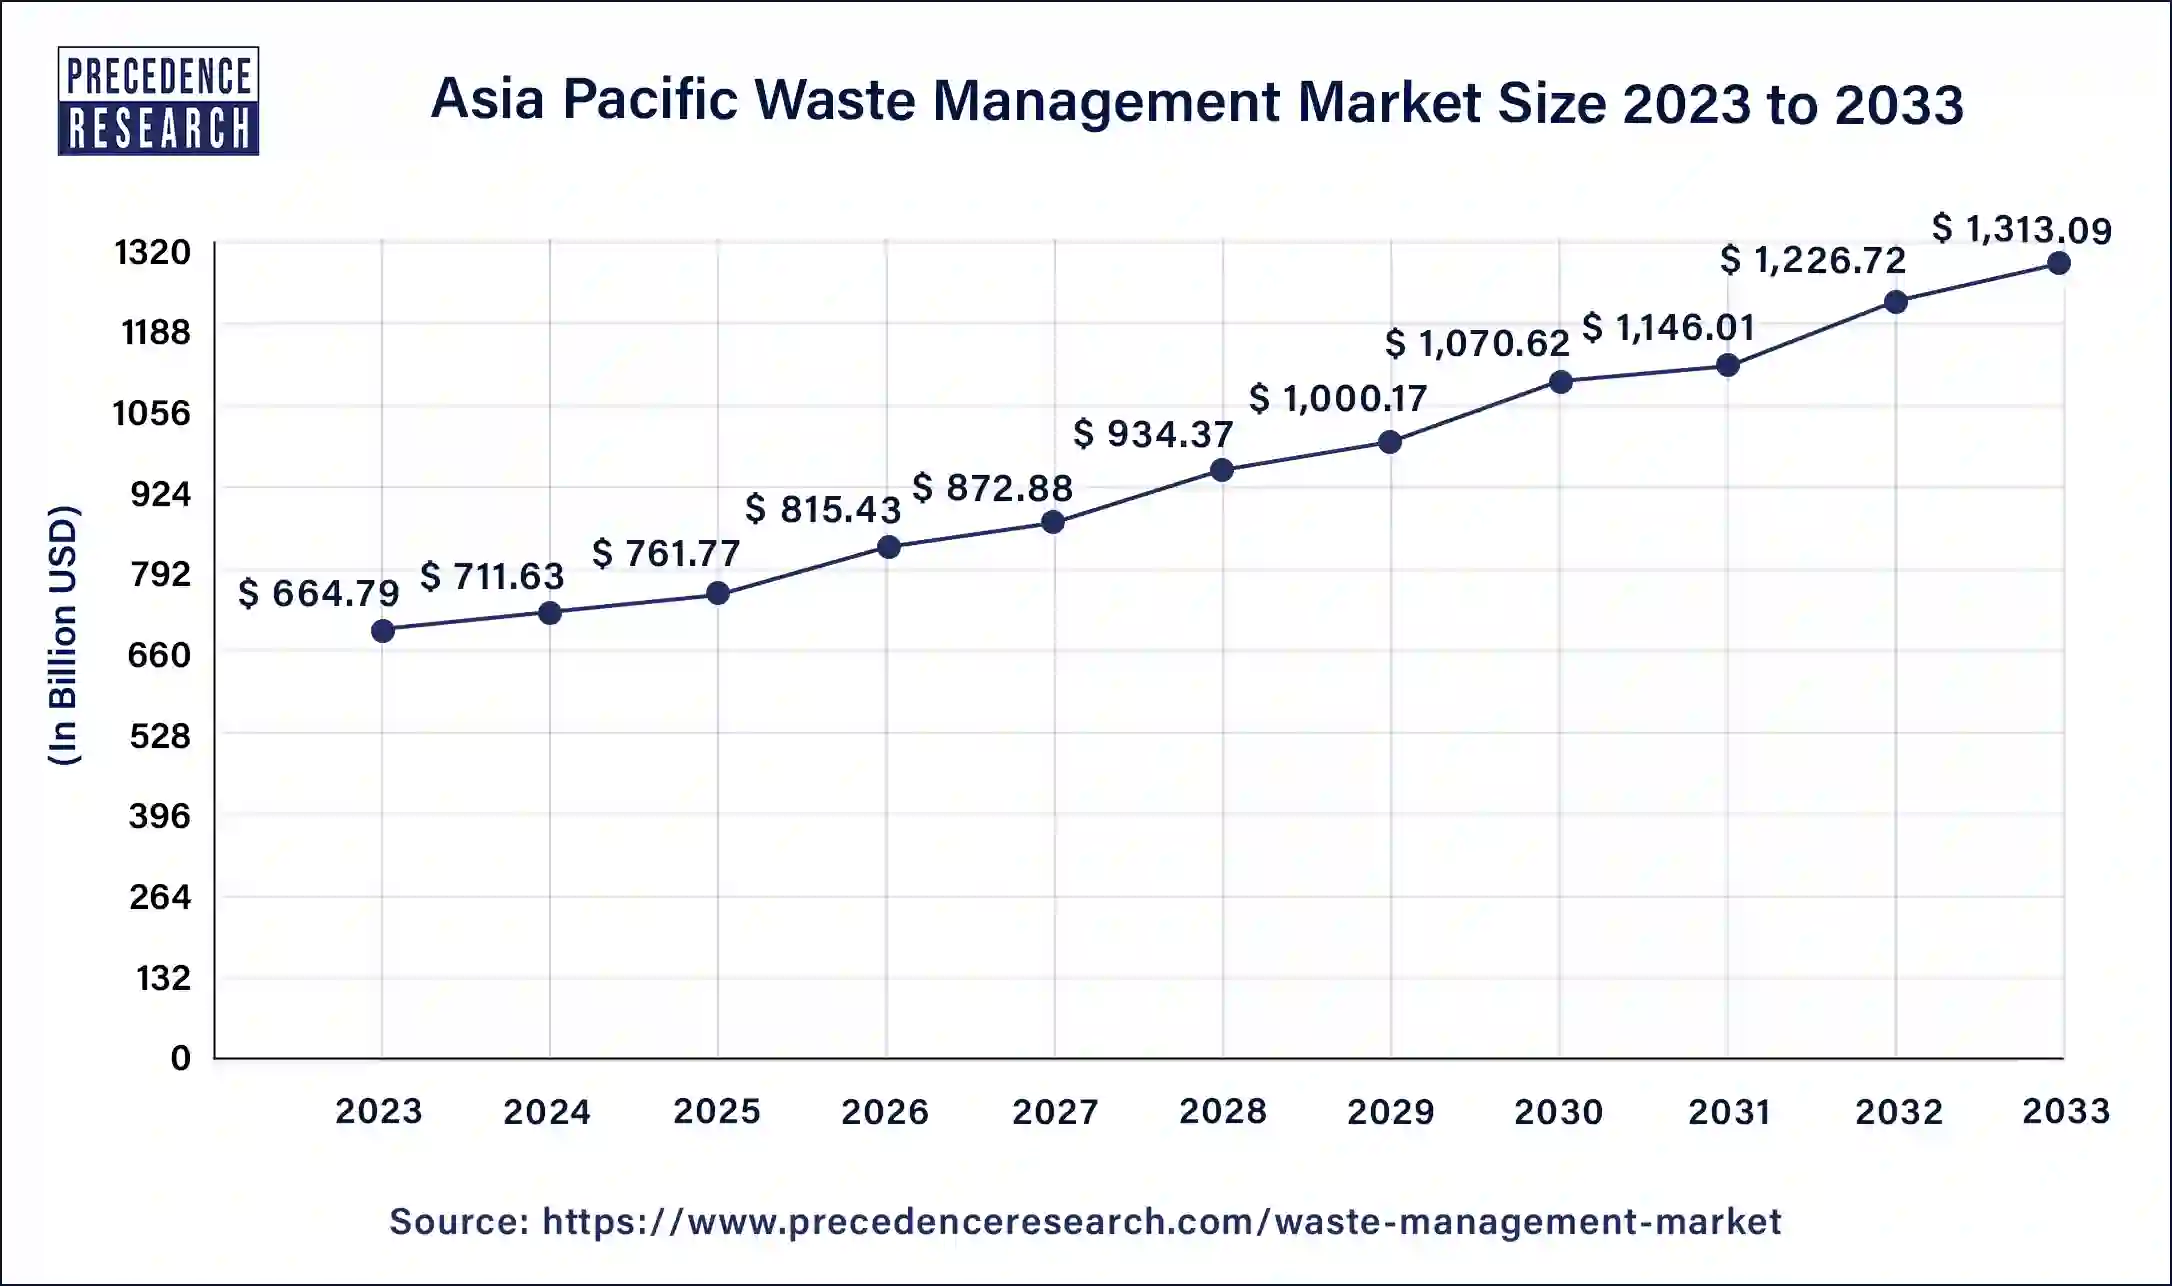 Asia Pacific Waste Management Market Size 2024 to 2033